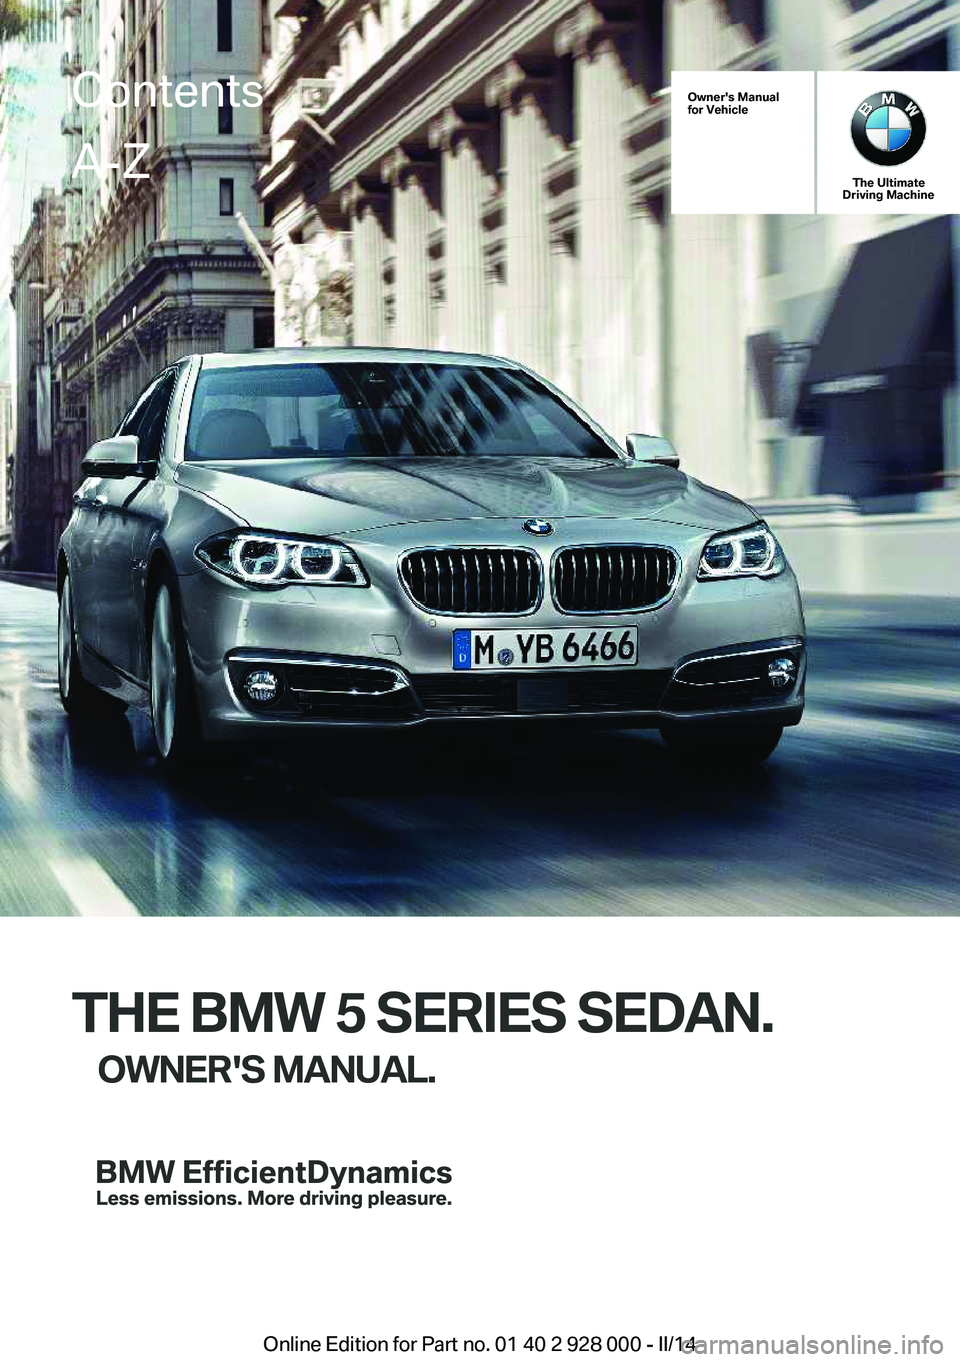 BMW 550I 2014  Owners Manual Owner's Manual
for Vehicle
The Ultimate
Driving Machine
THE BMW 5 SERIES SEDAN.
OWNER'S MANUAL.
ContentsA-Z
Online Edition for Part no. 01 40 2 928 000 - II/14   